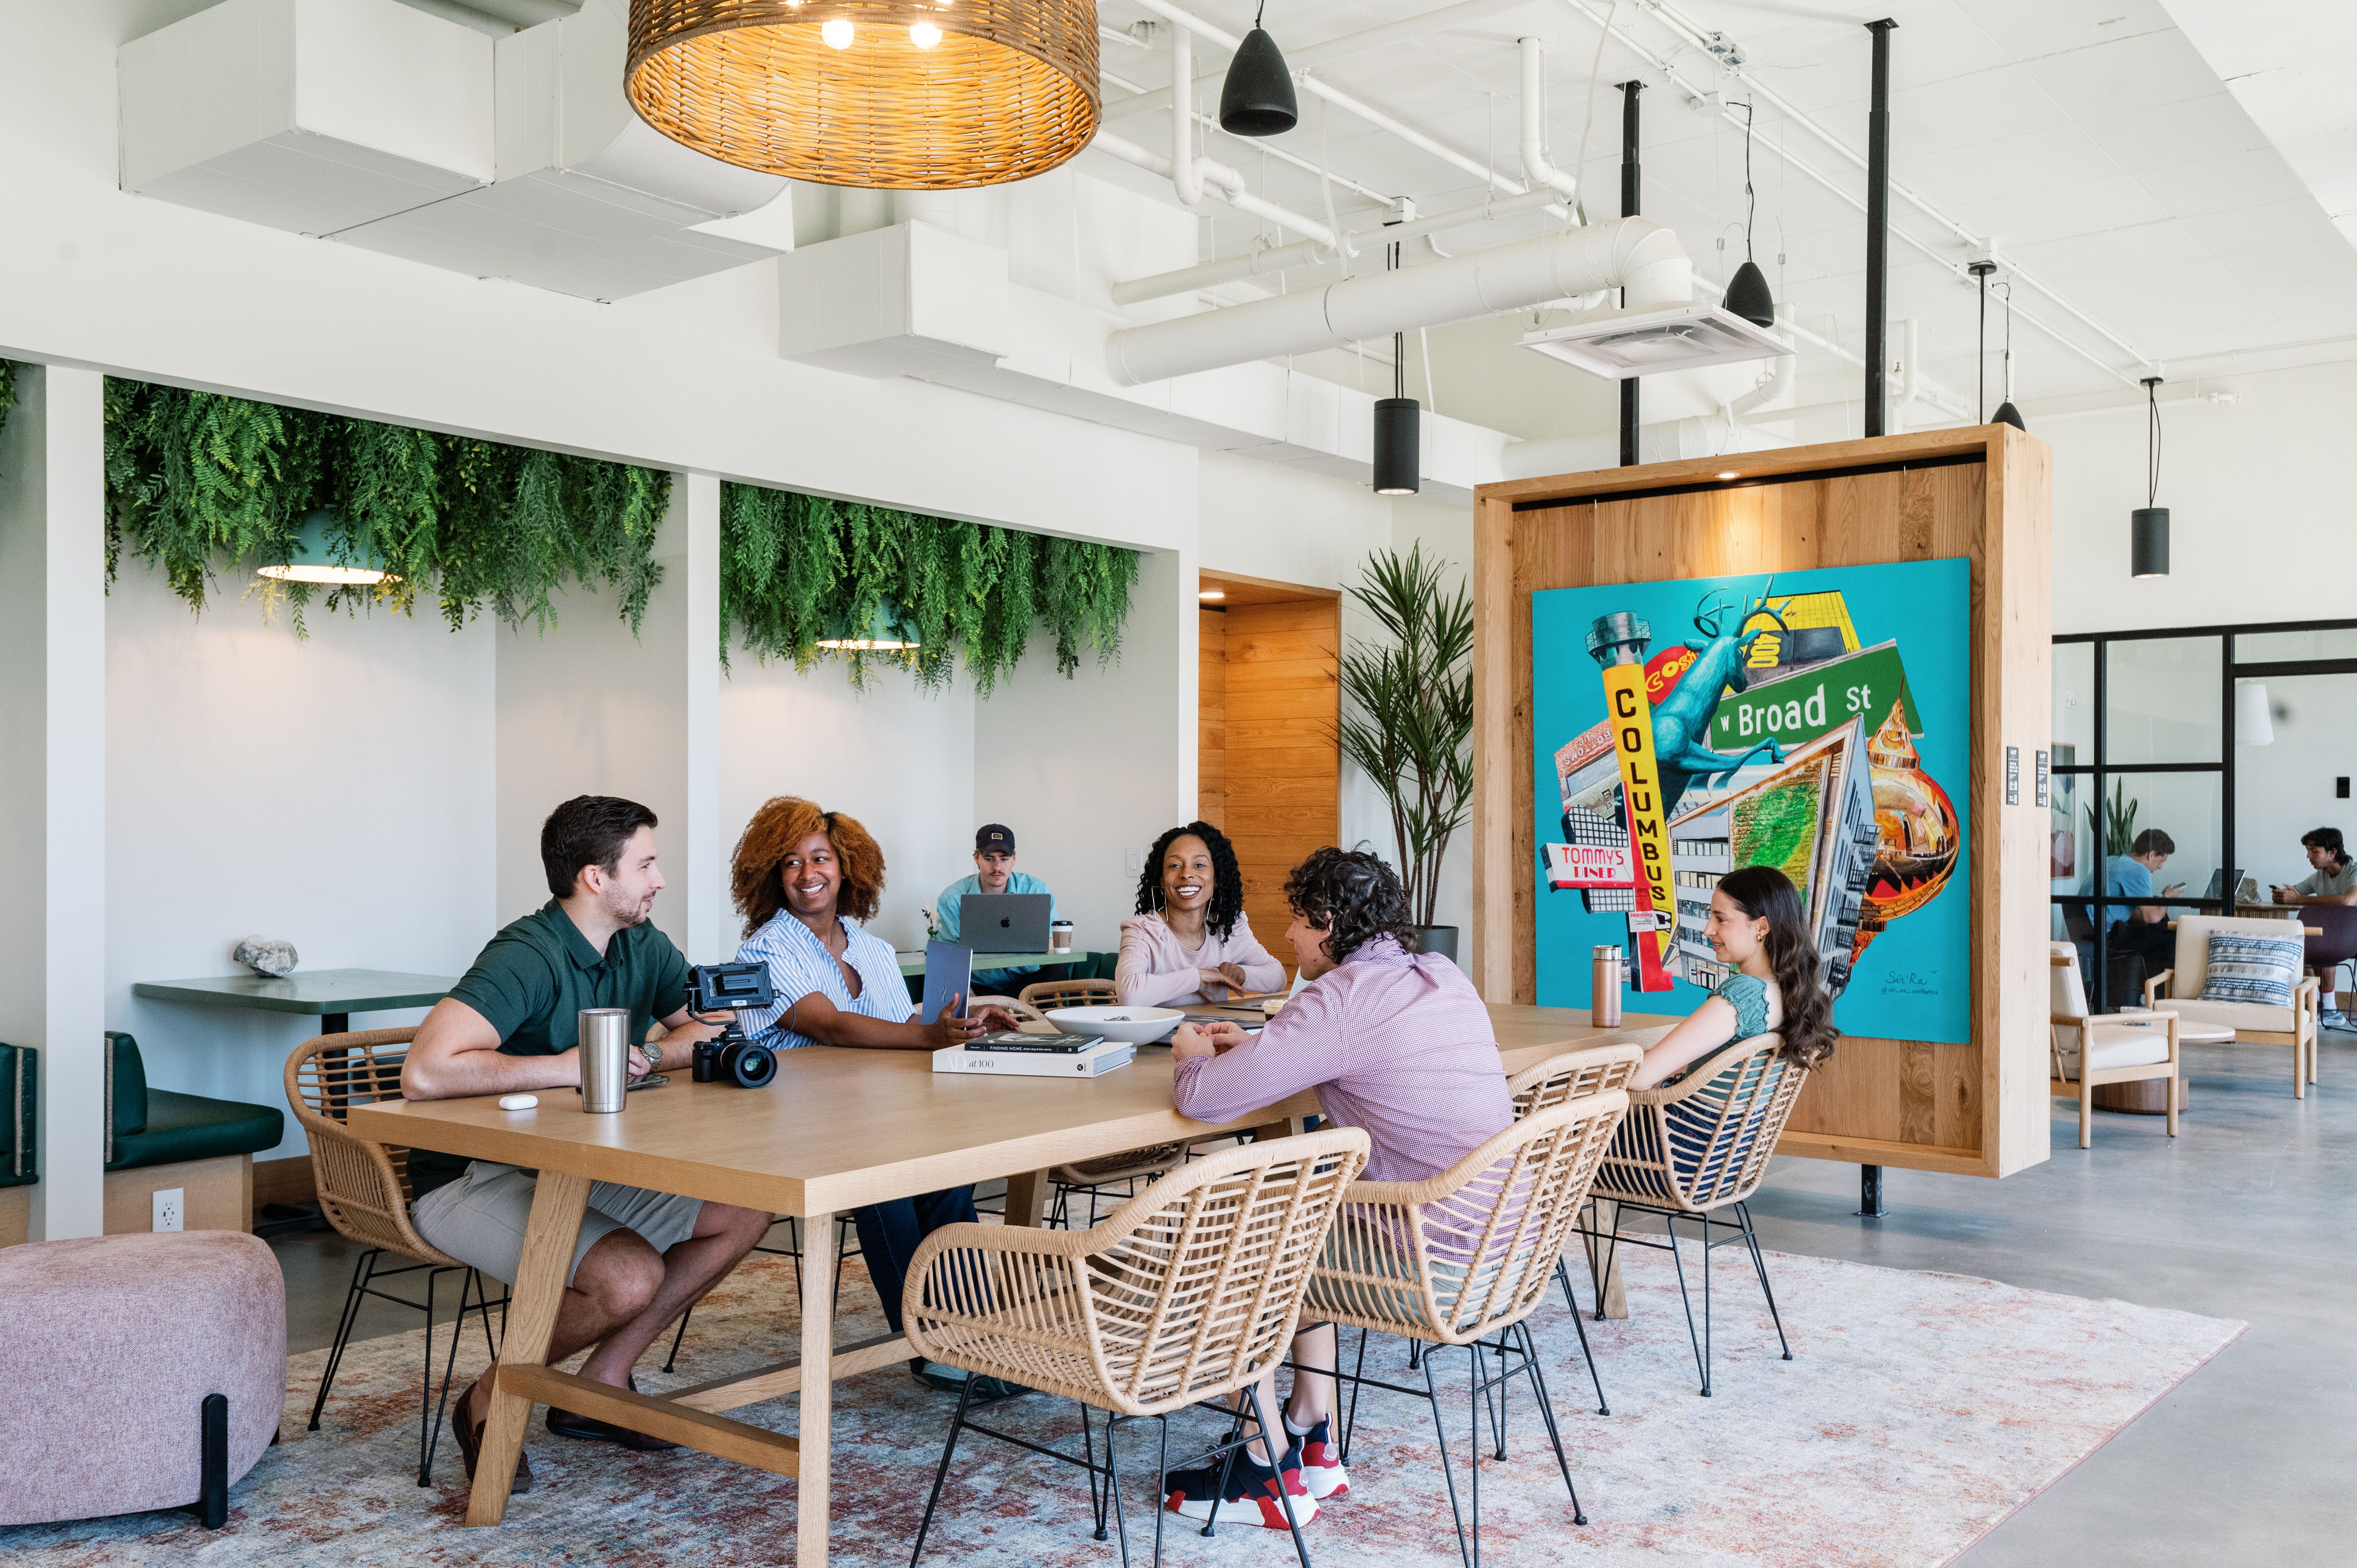 A coworking space in a Gravity apartment building, with tenants gathered at large tables near a Columbus-themed mural